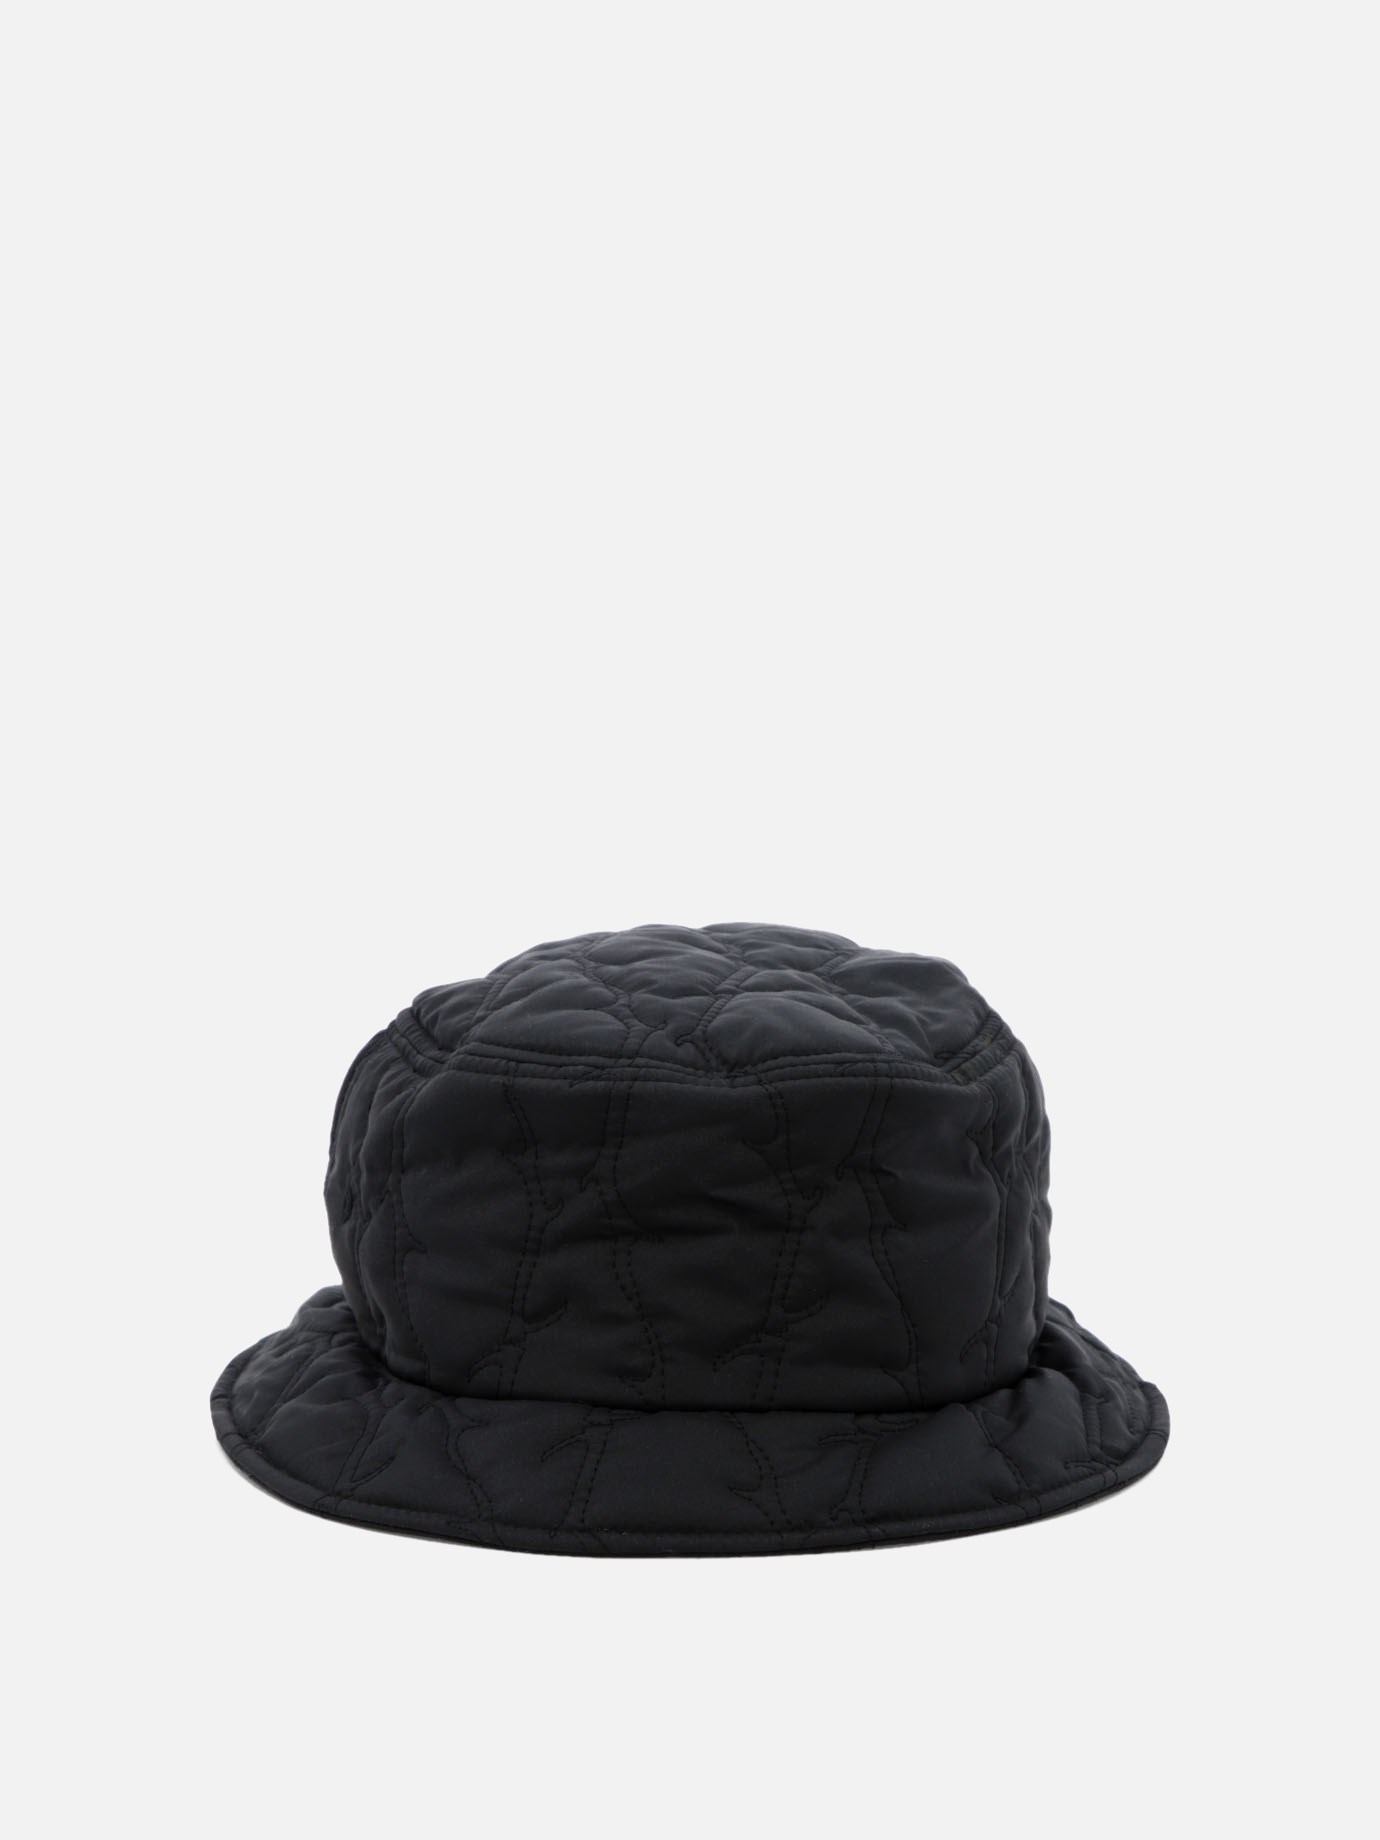 Cappello bucket trapuntatoby South2 West8 - 2